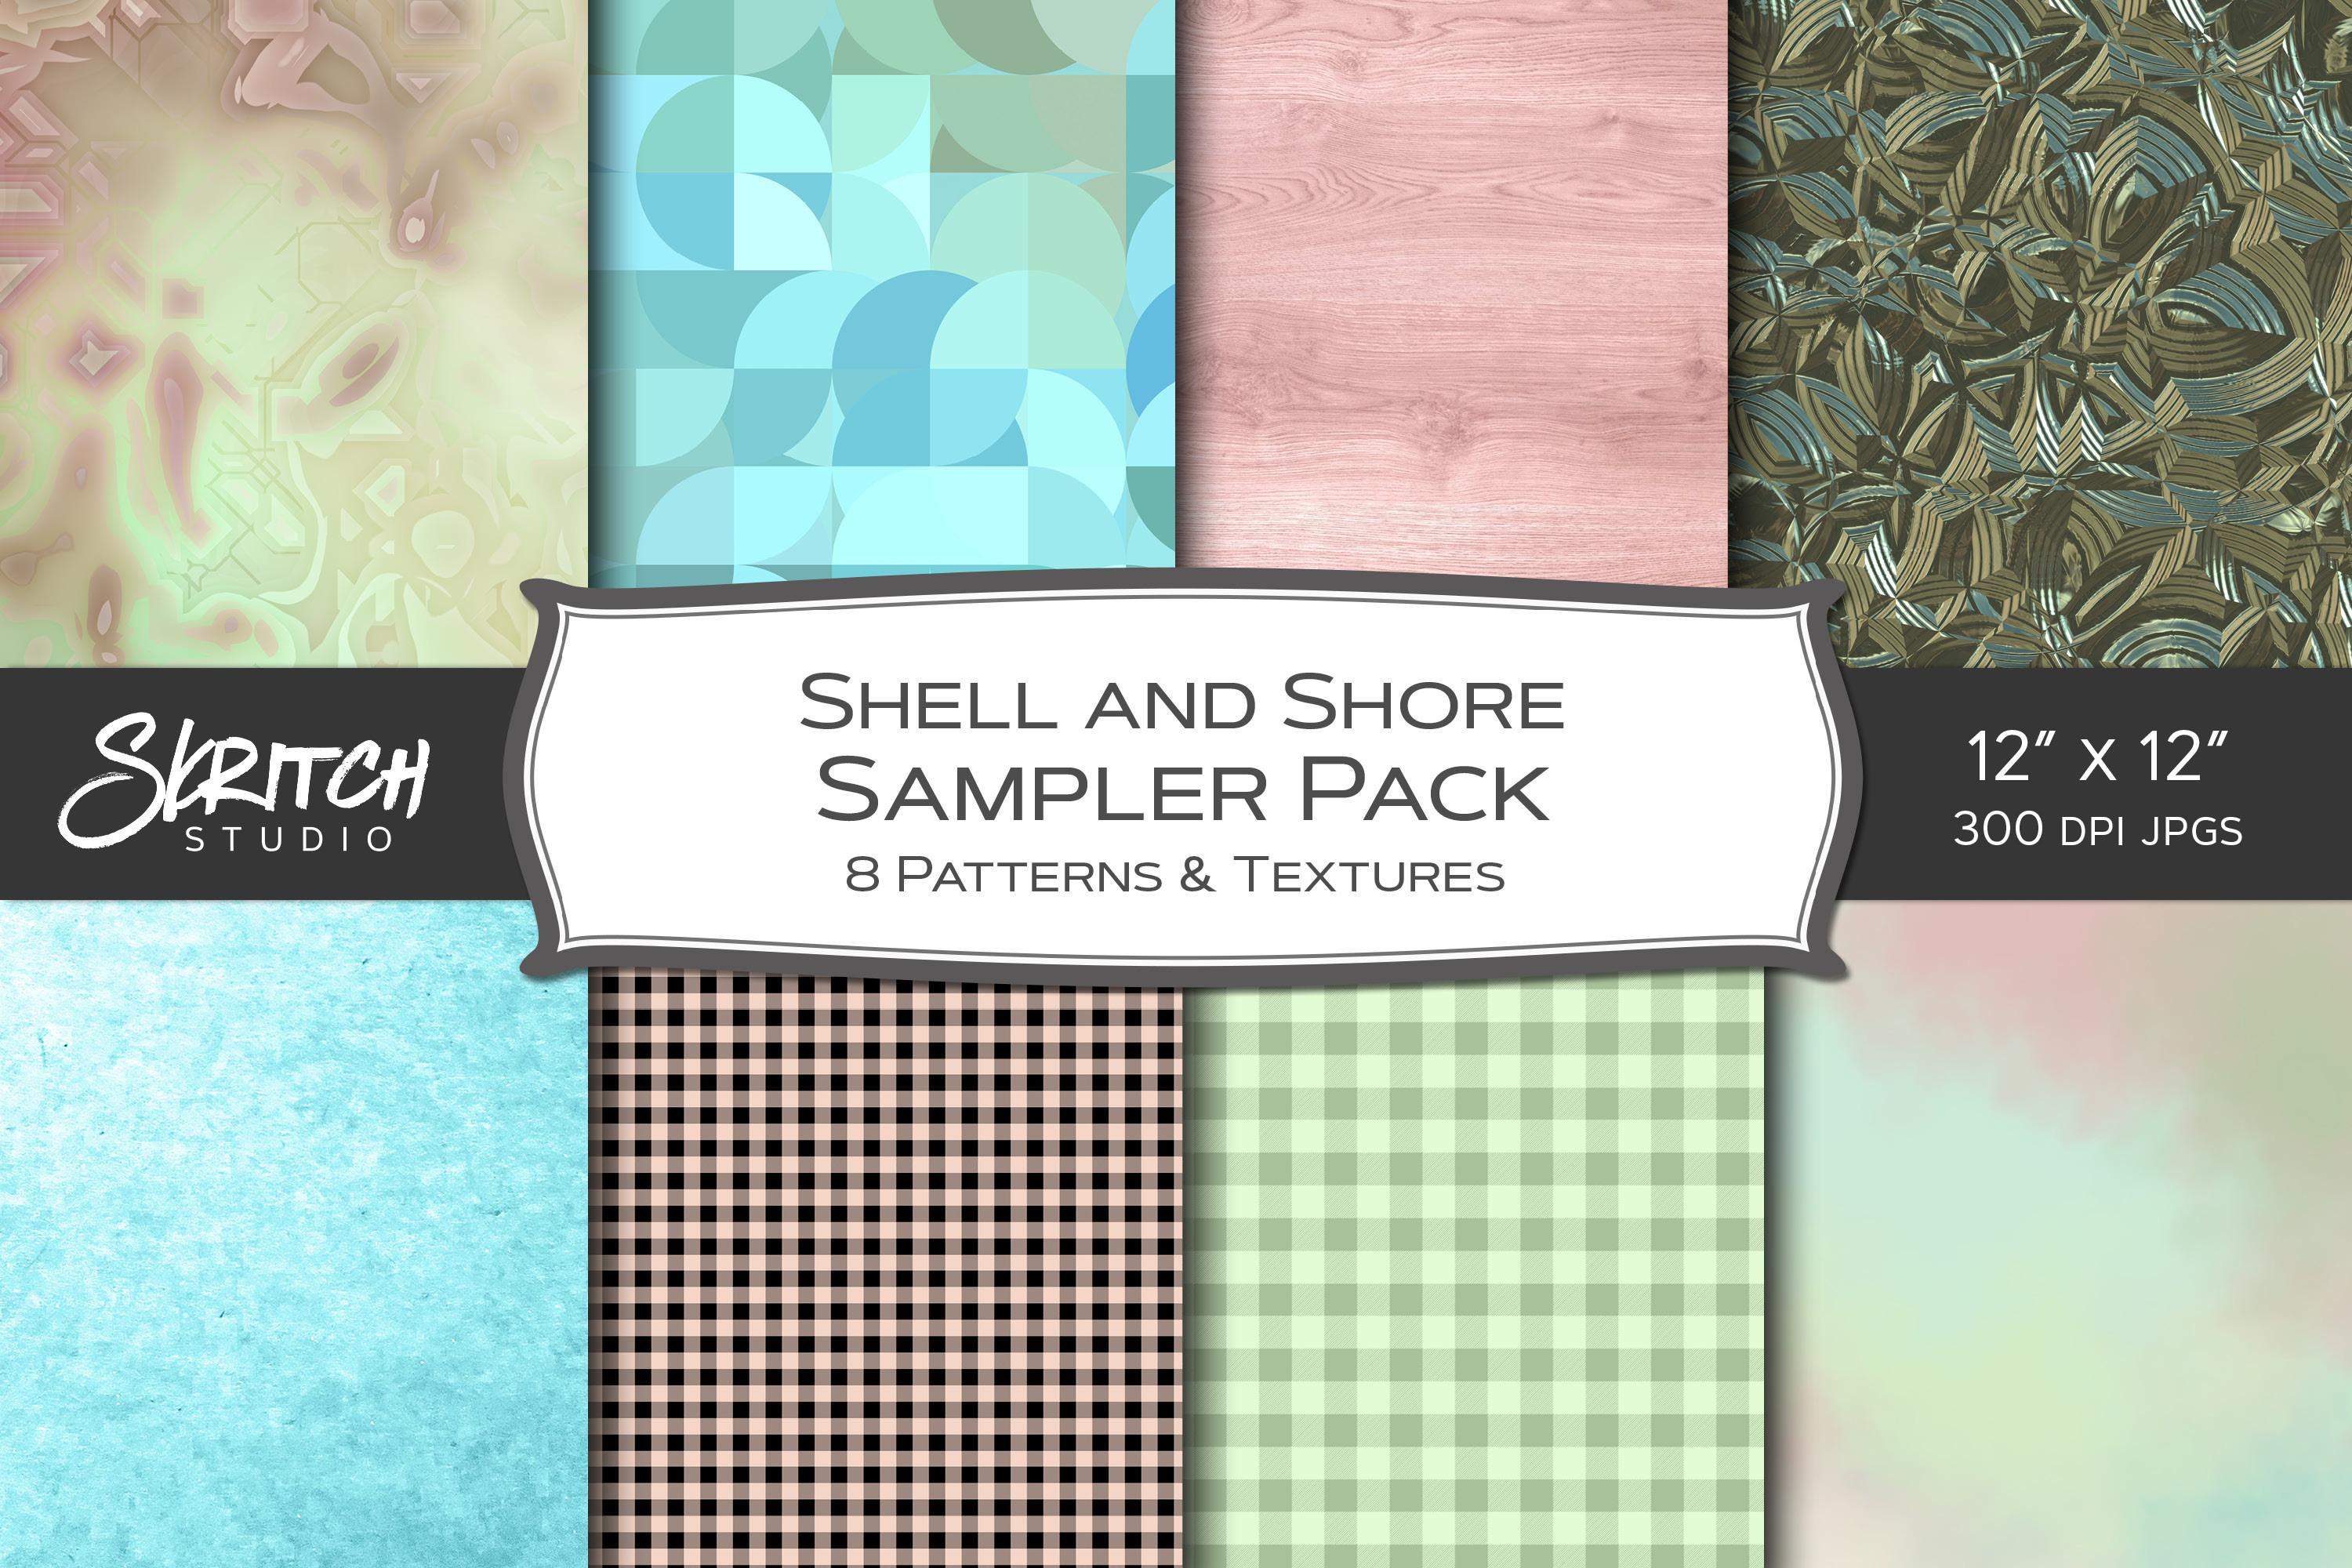 Shell and Shore Free Sampler Pack